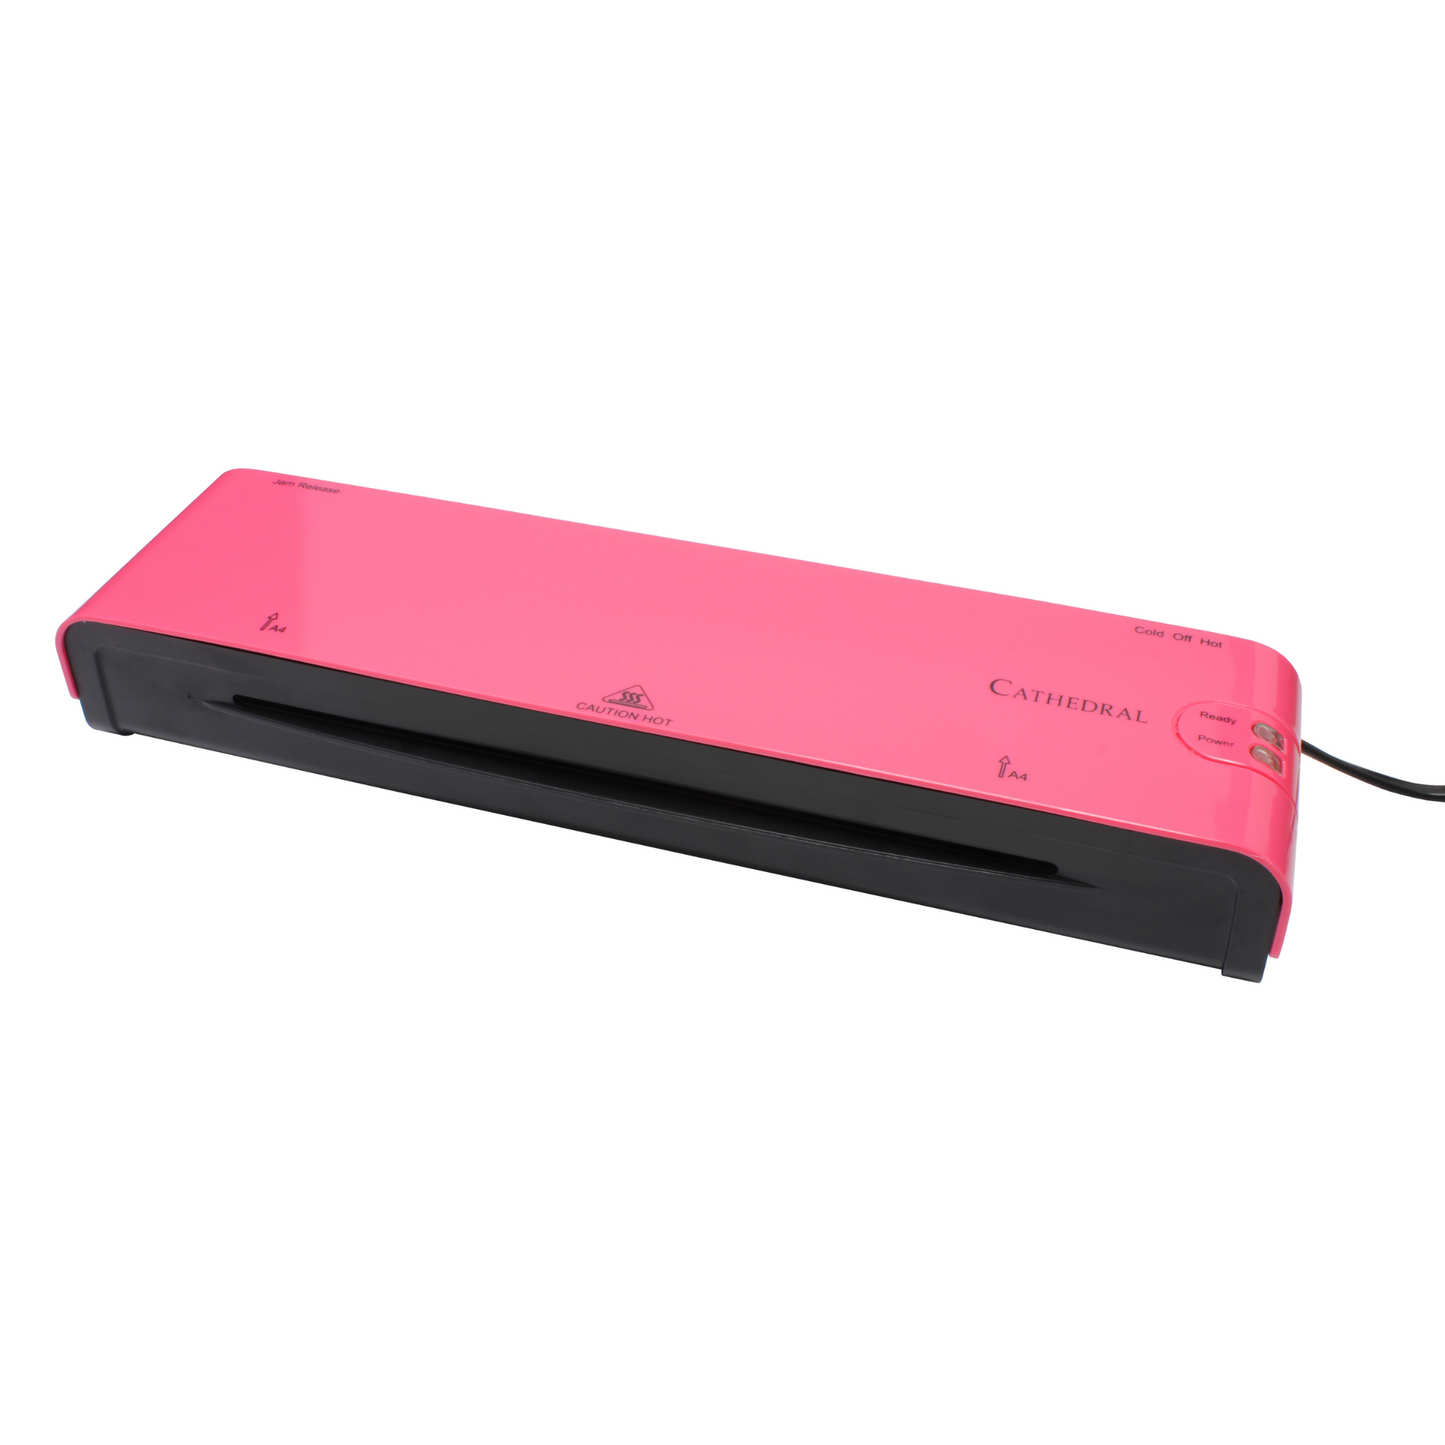 A4 Laminator With Jam Release